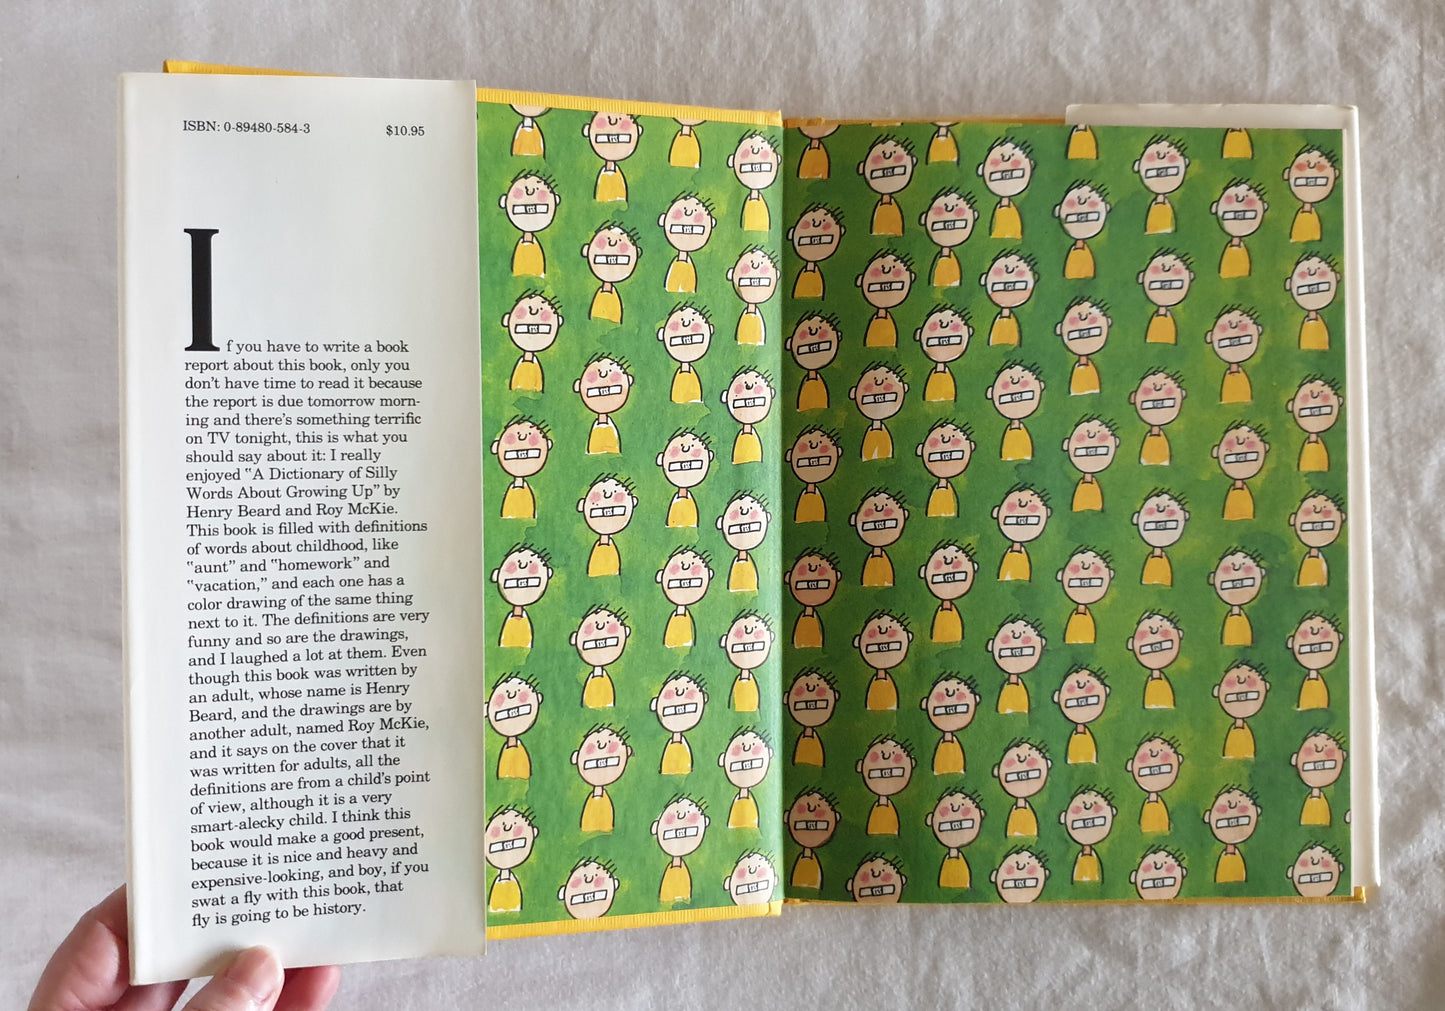 A Dictionary of Silly Words About Growing Up by Henry Beard and Roy McKie